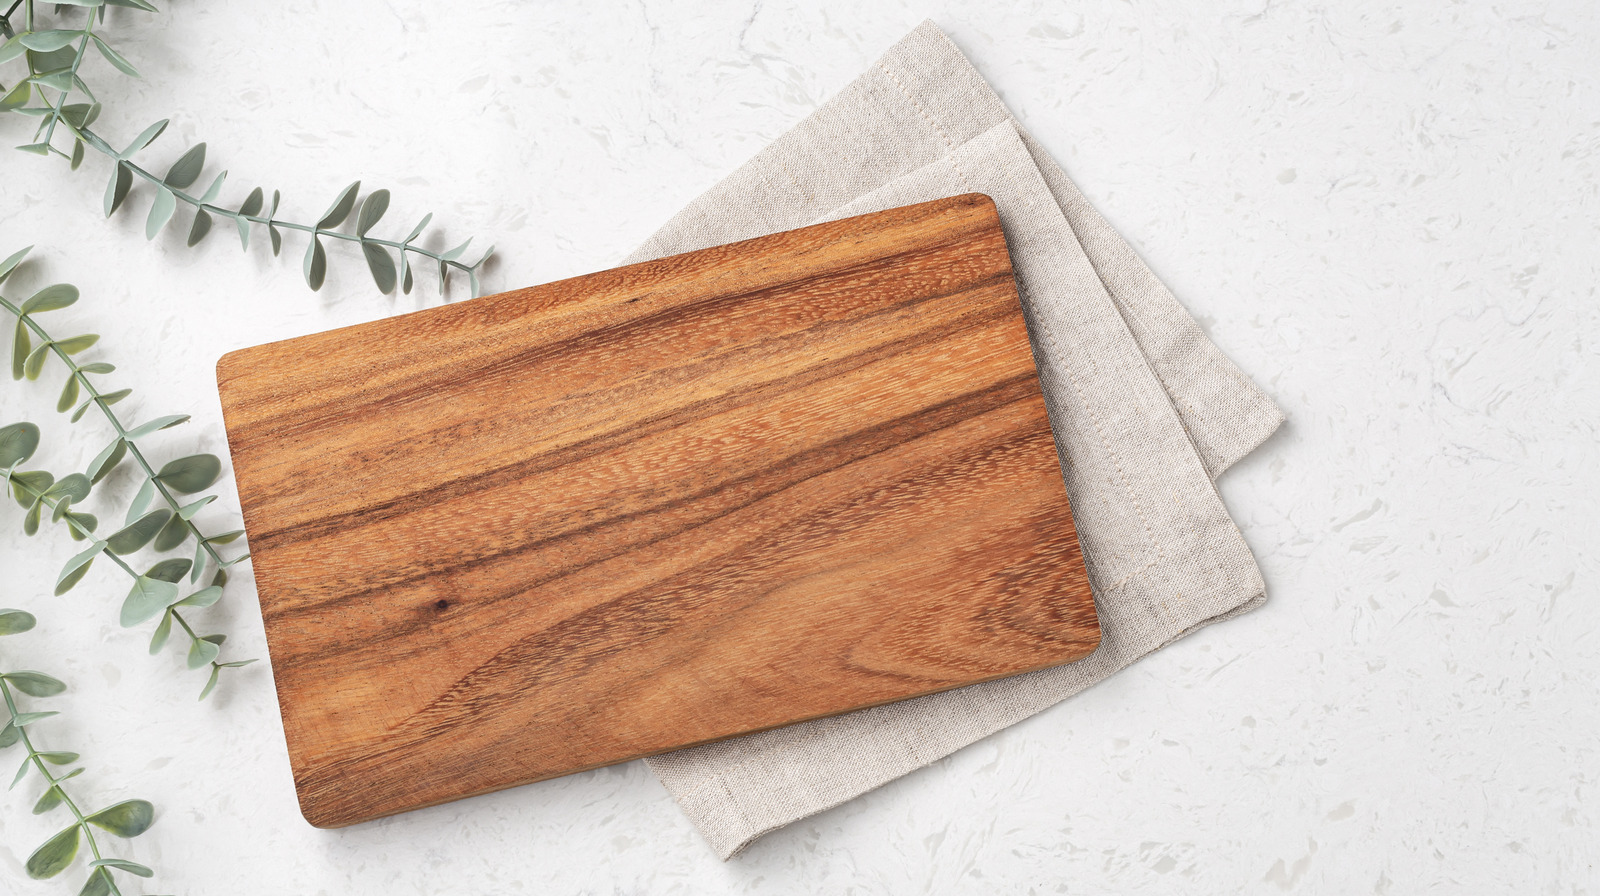 https://www.thedailymeal.com/img/gallery/the-correct-way-to-store-wooden-cutting-boards-so-they-last-way-longer/l-intro-1690304290.jpg